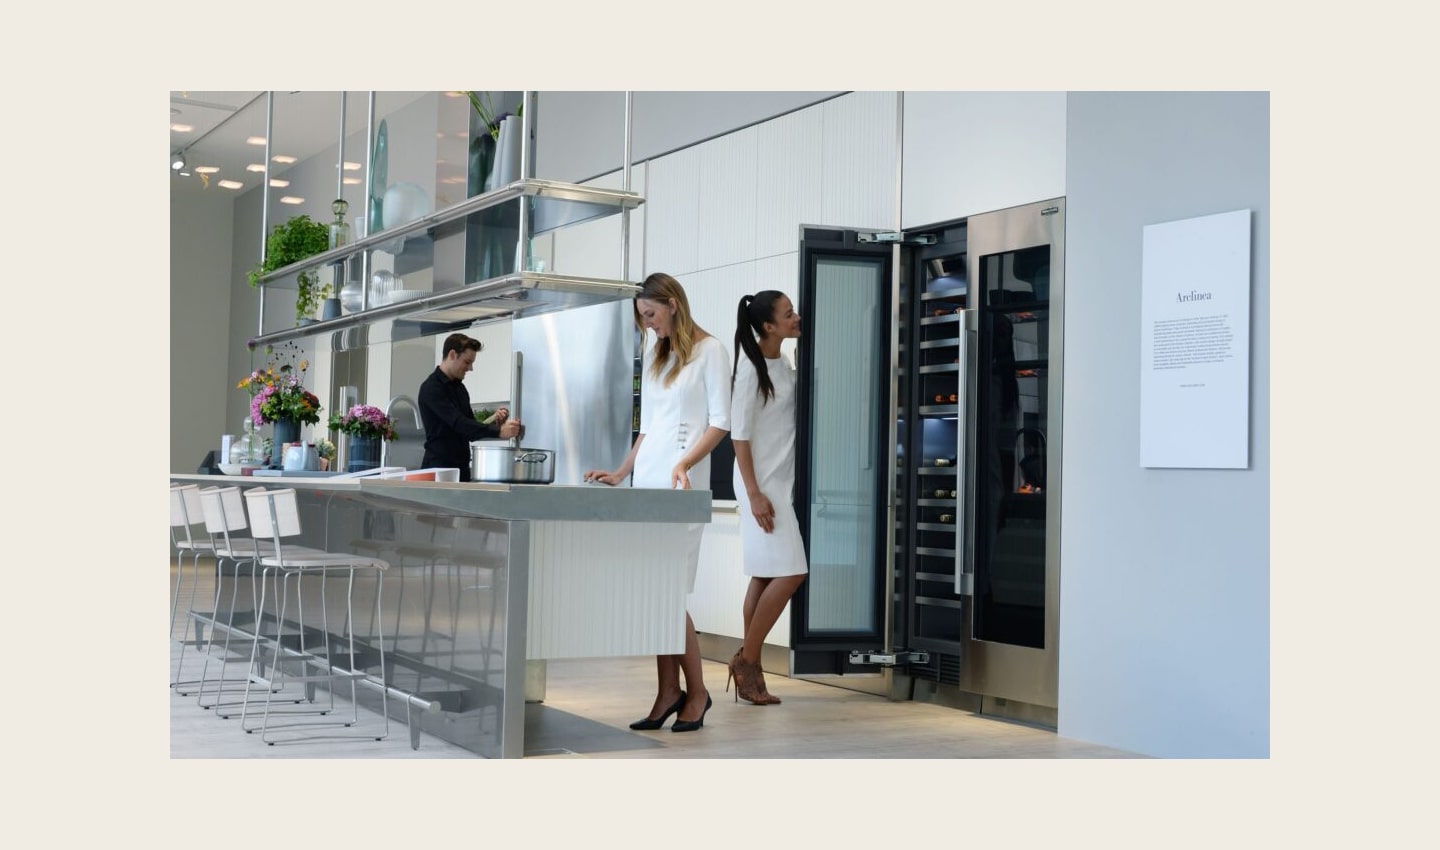 Another side view of the LG Signature Kitchen Suite display zone, three models are standing in the kitchen